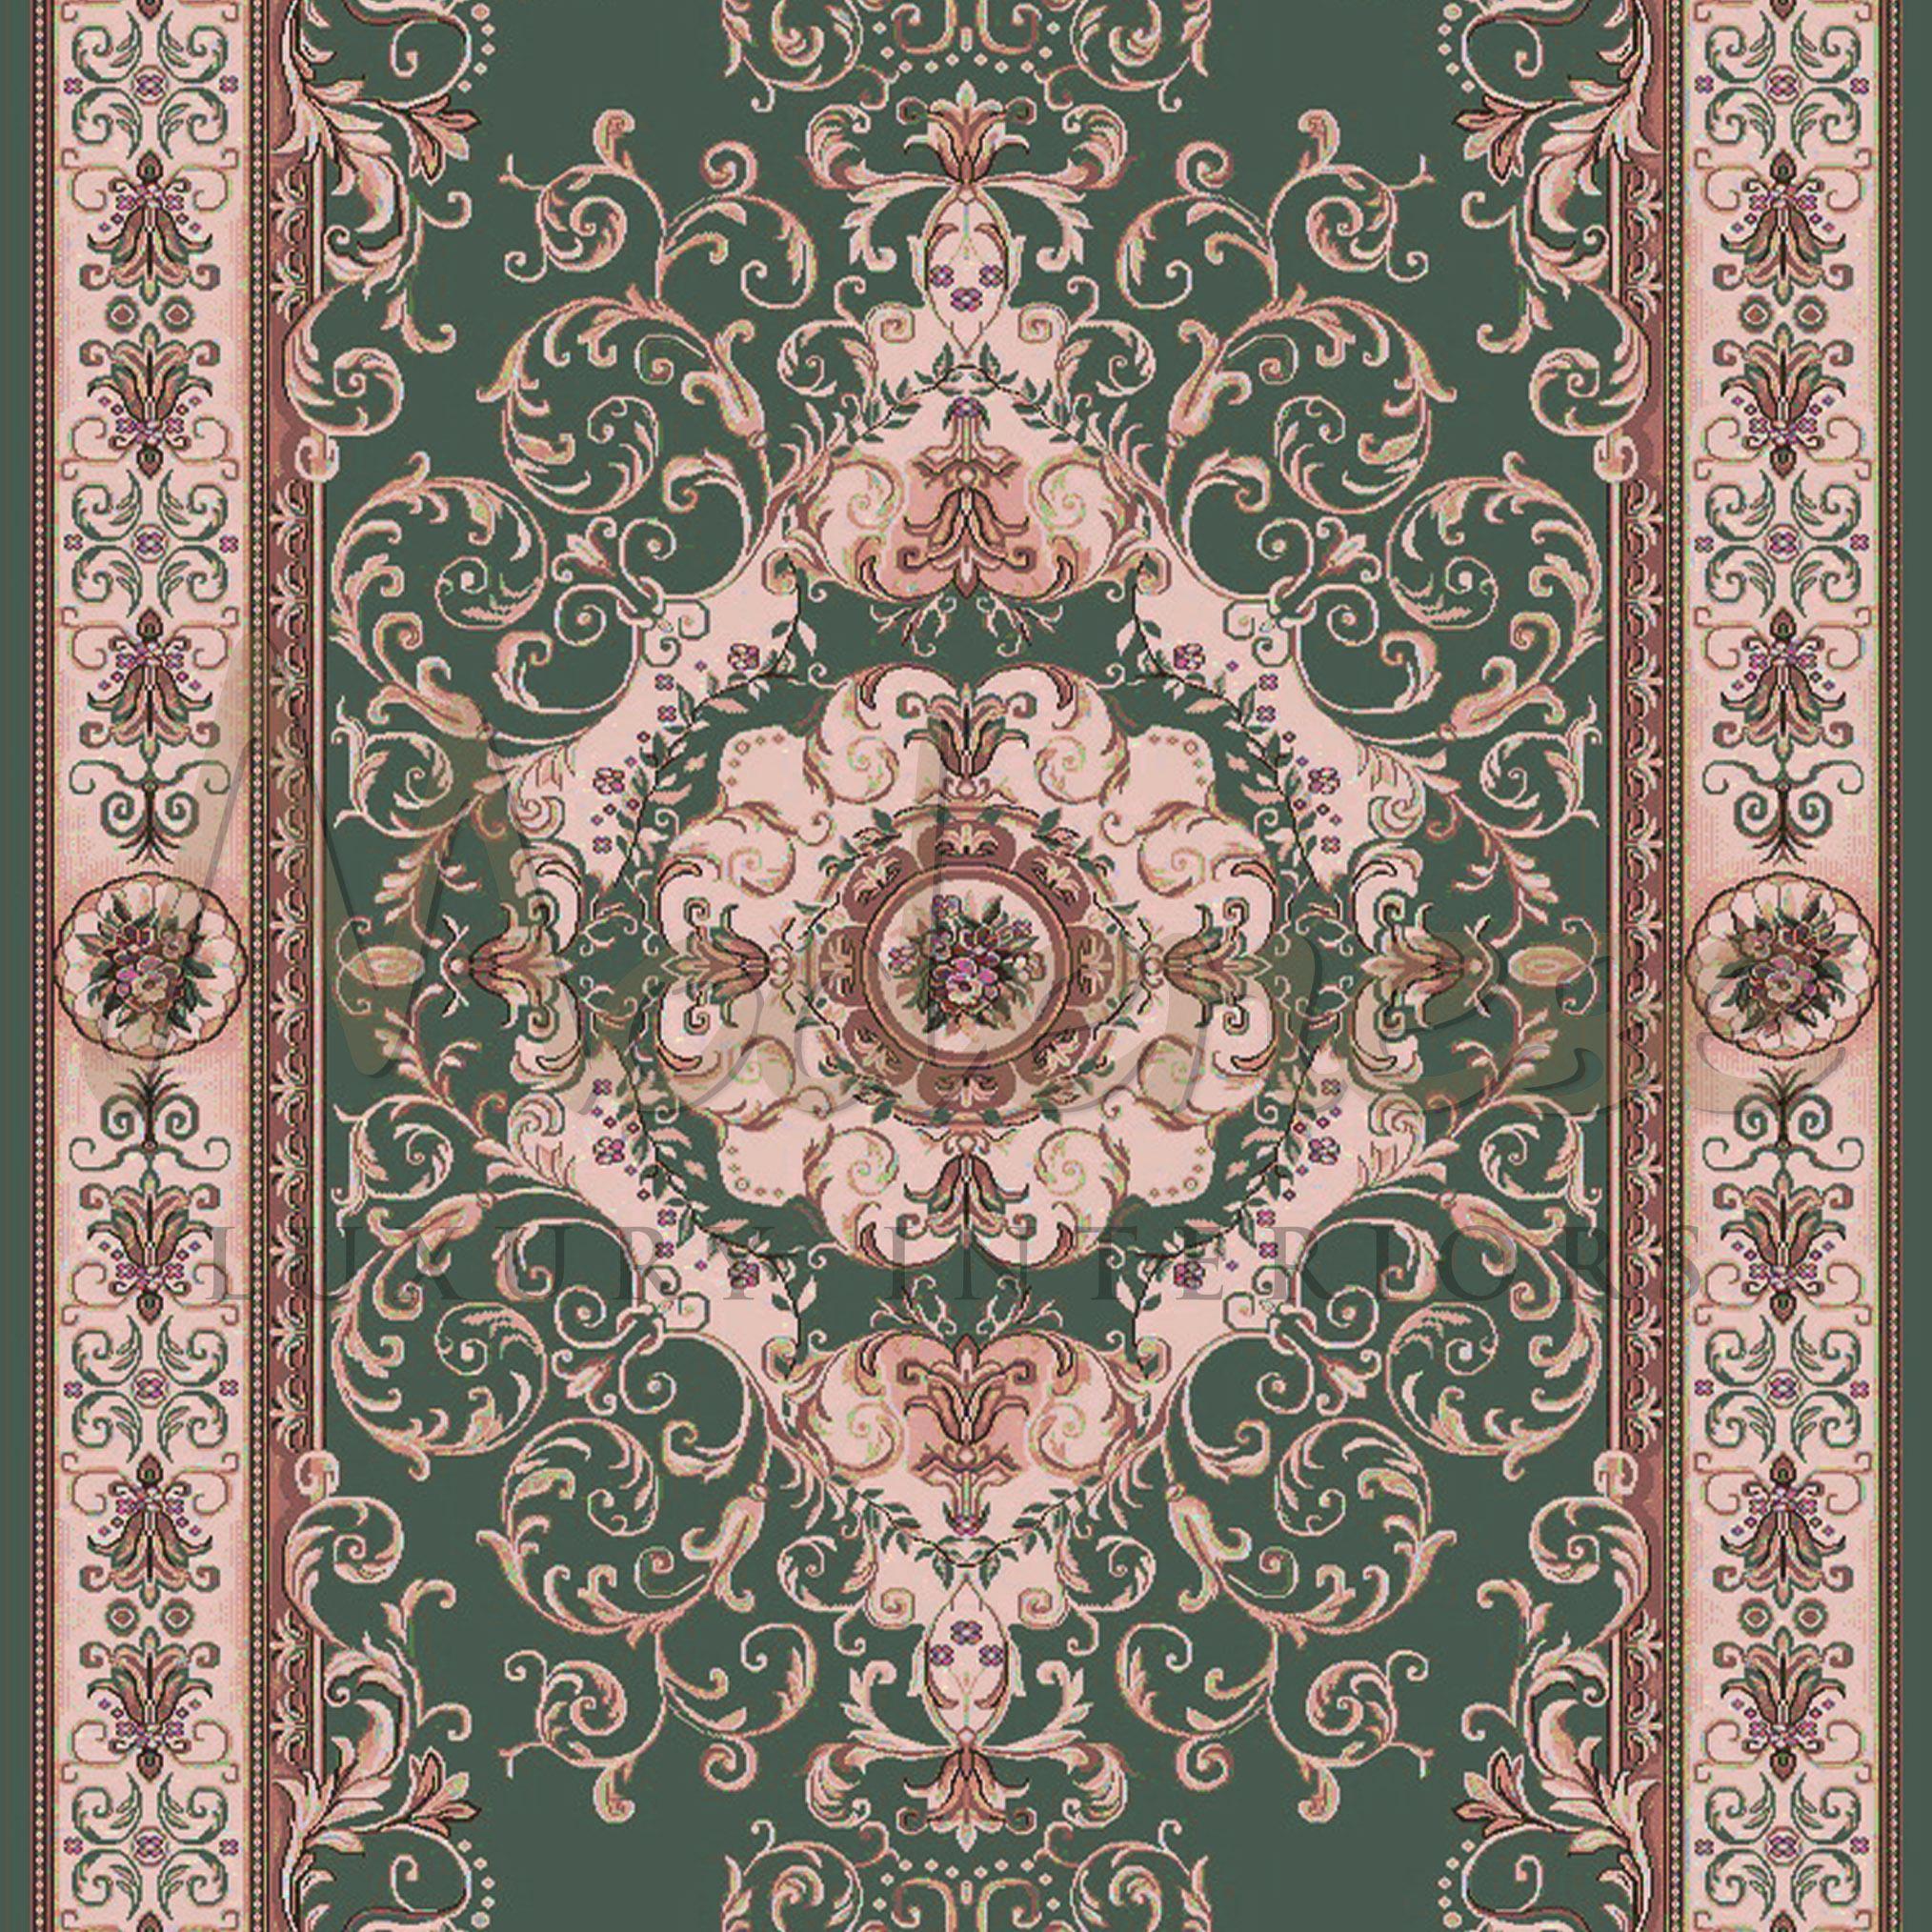 100% bamboo silk and cotton handbraided rectangular rug with intricate pattern of squiggles and blossoms, lisht pink decorations on an emerald background. Goes perfectly in luxury villas and majlis, bespoke production by Modenese Gastone Luxury